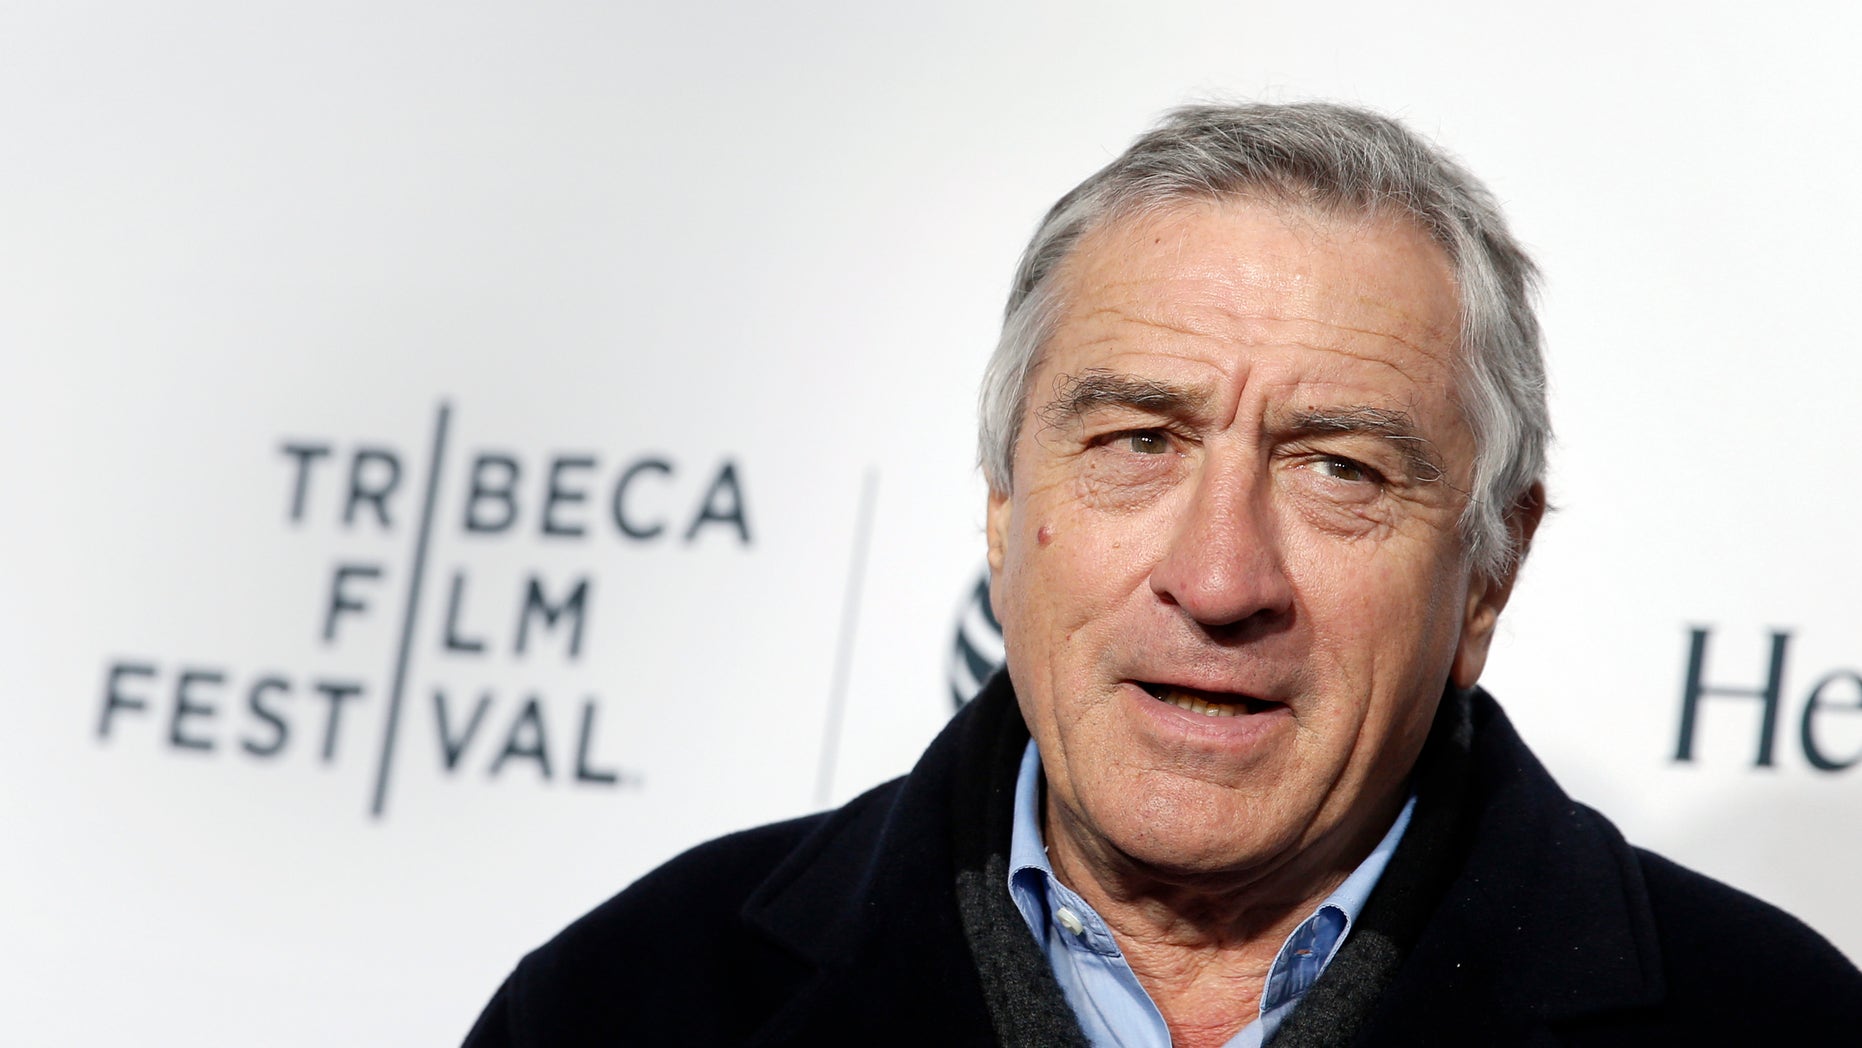 Robert De Niro Reveals In Documentary That His Father Was Gay Fox News